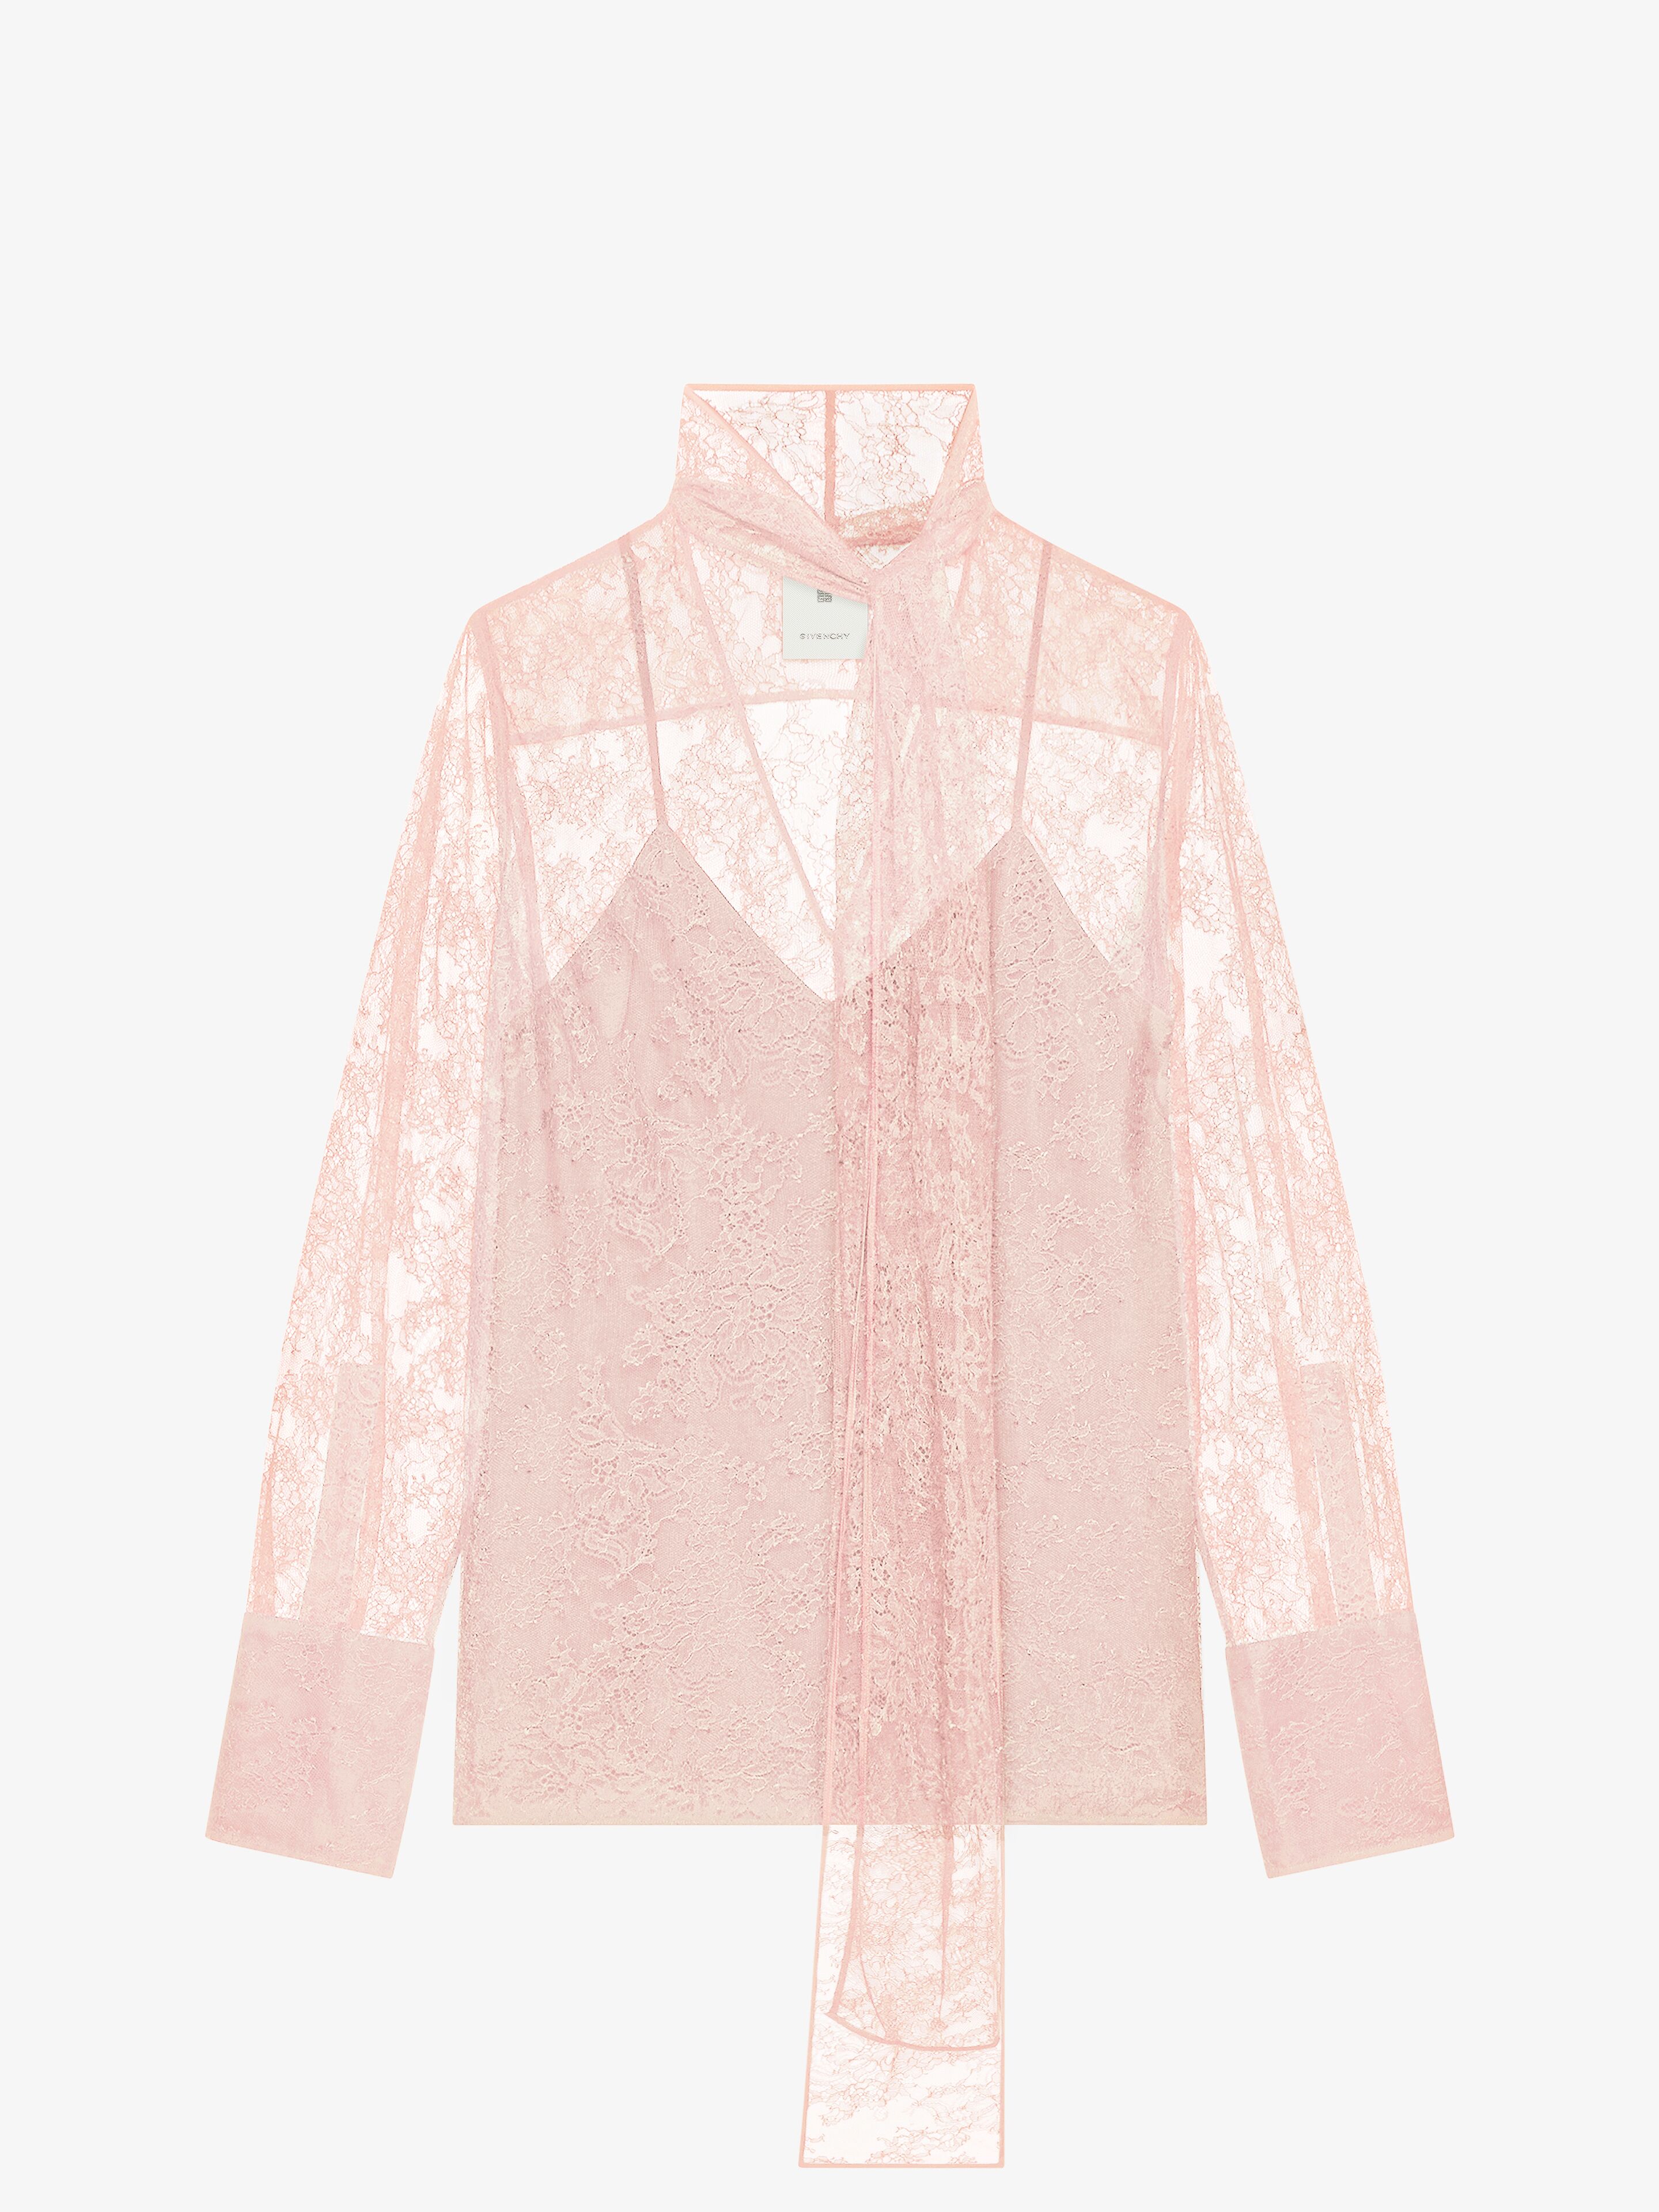 Givenchy Lace Blouse With Neck Tie In Blush Pink